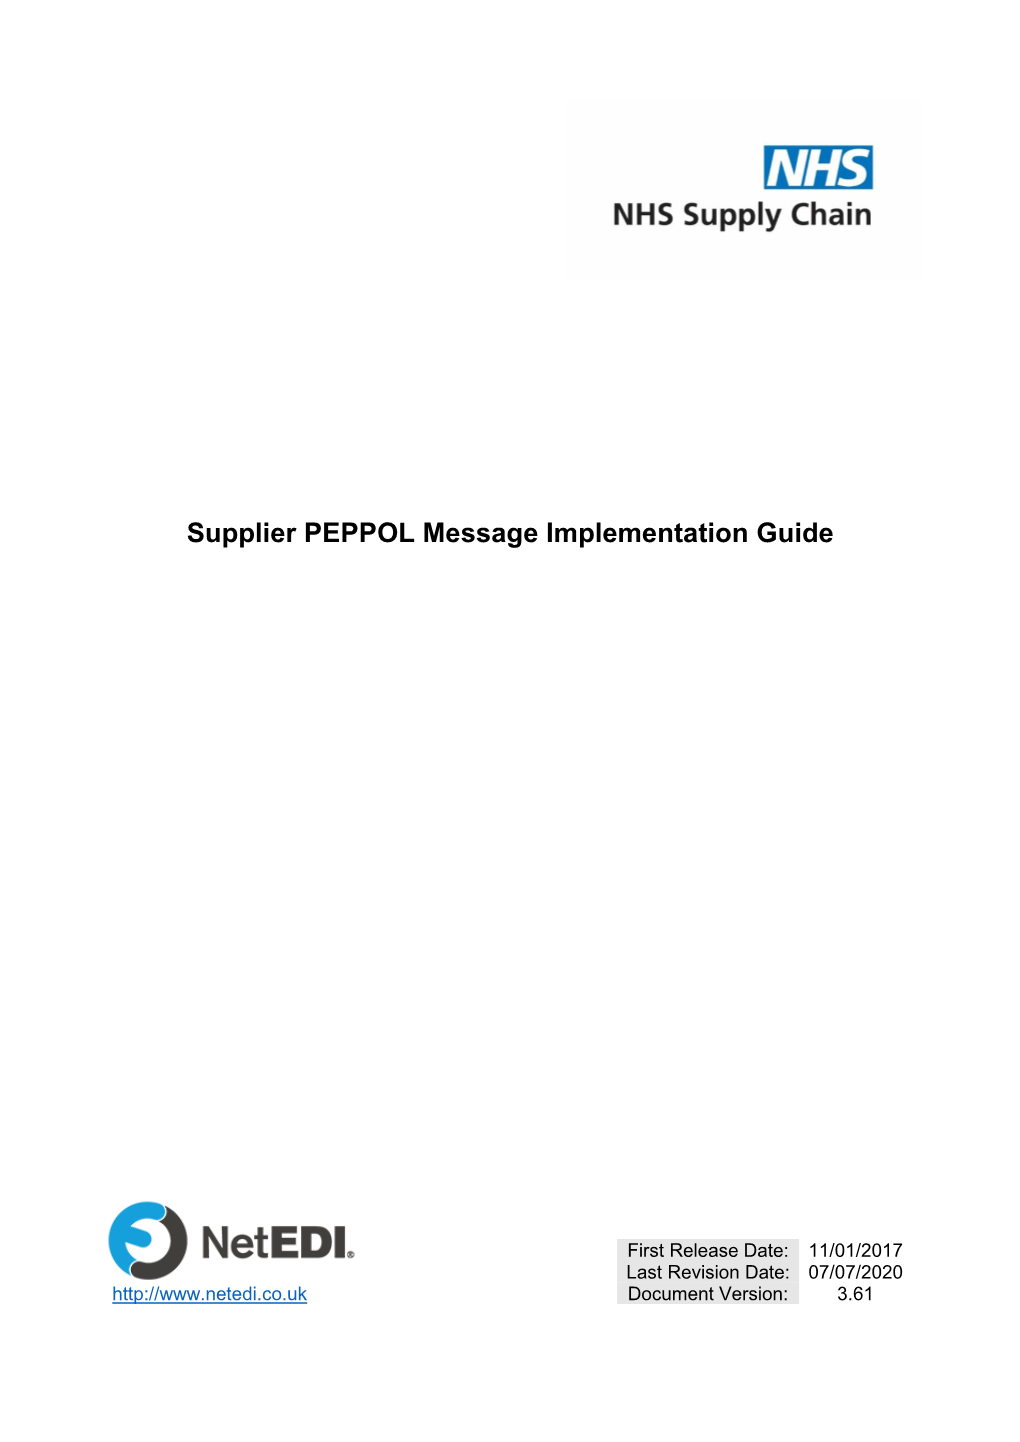 NHS Supply Chain Supplier Implementation Guide